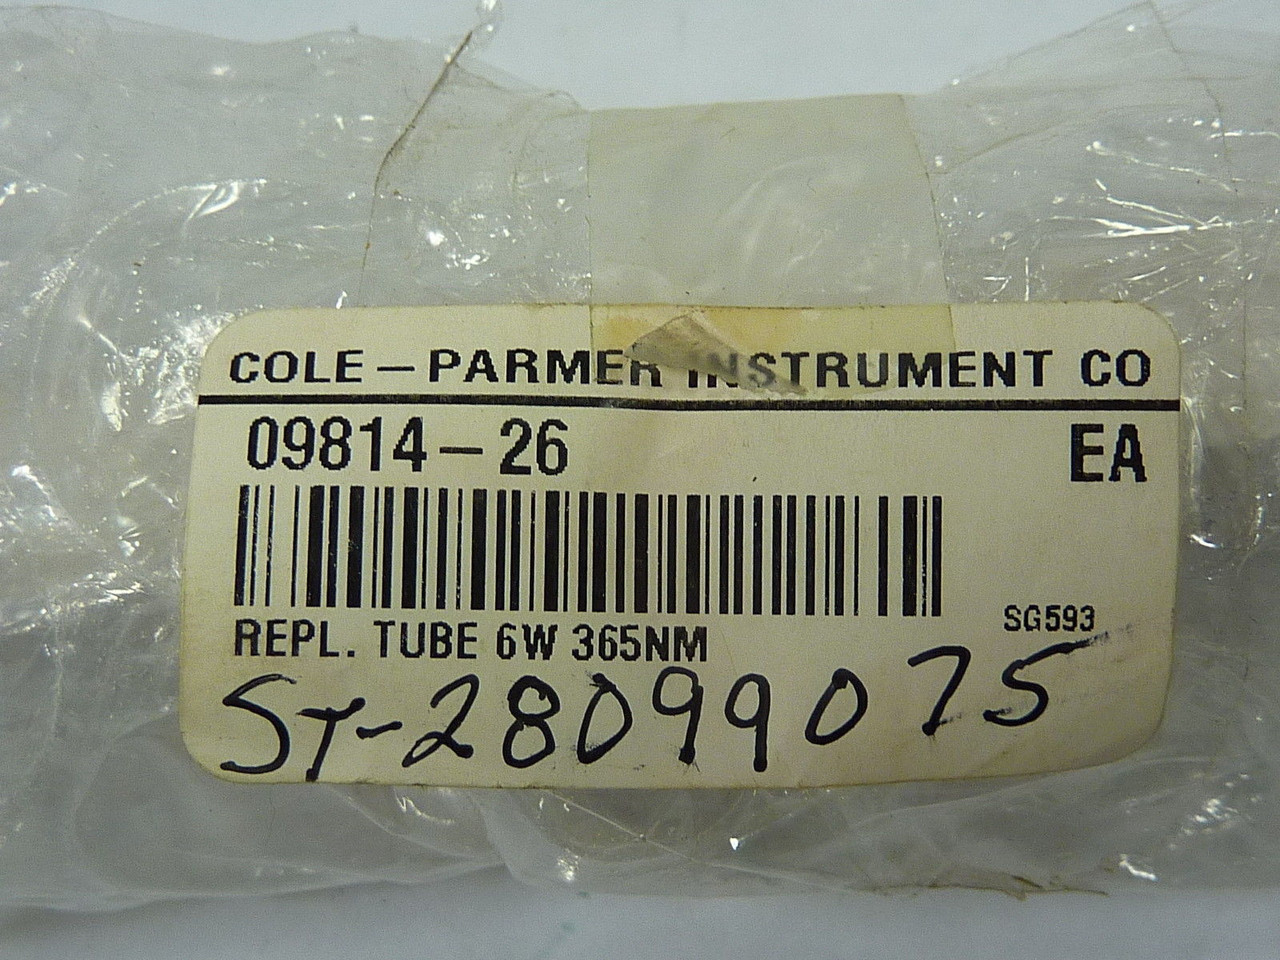 Cole Parmer Instrument Co. 09814-26 Replacement Tube 6W 365NM ! NEW !